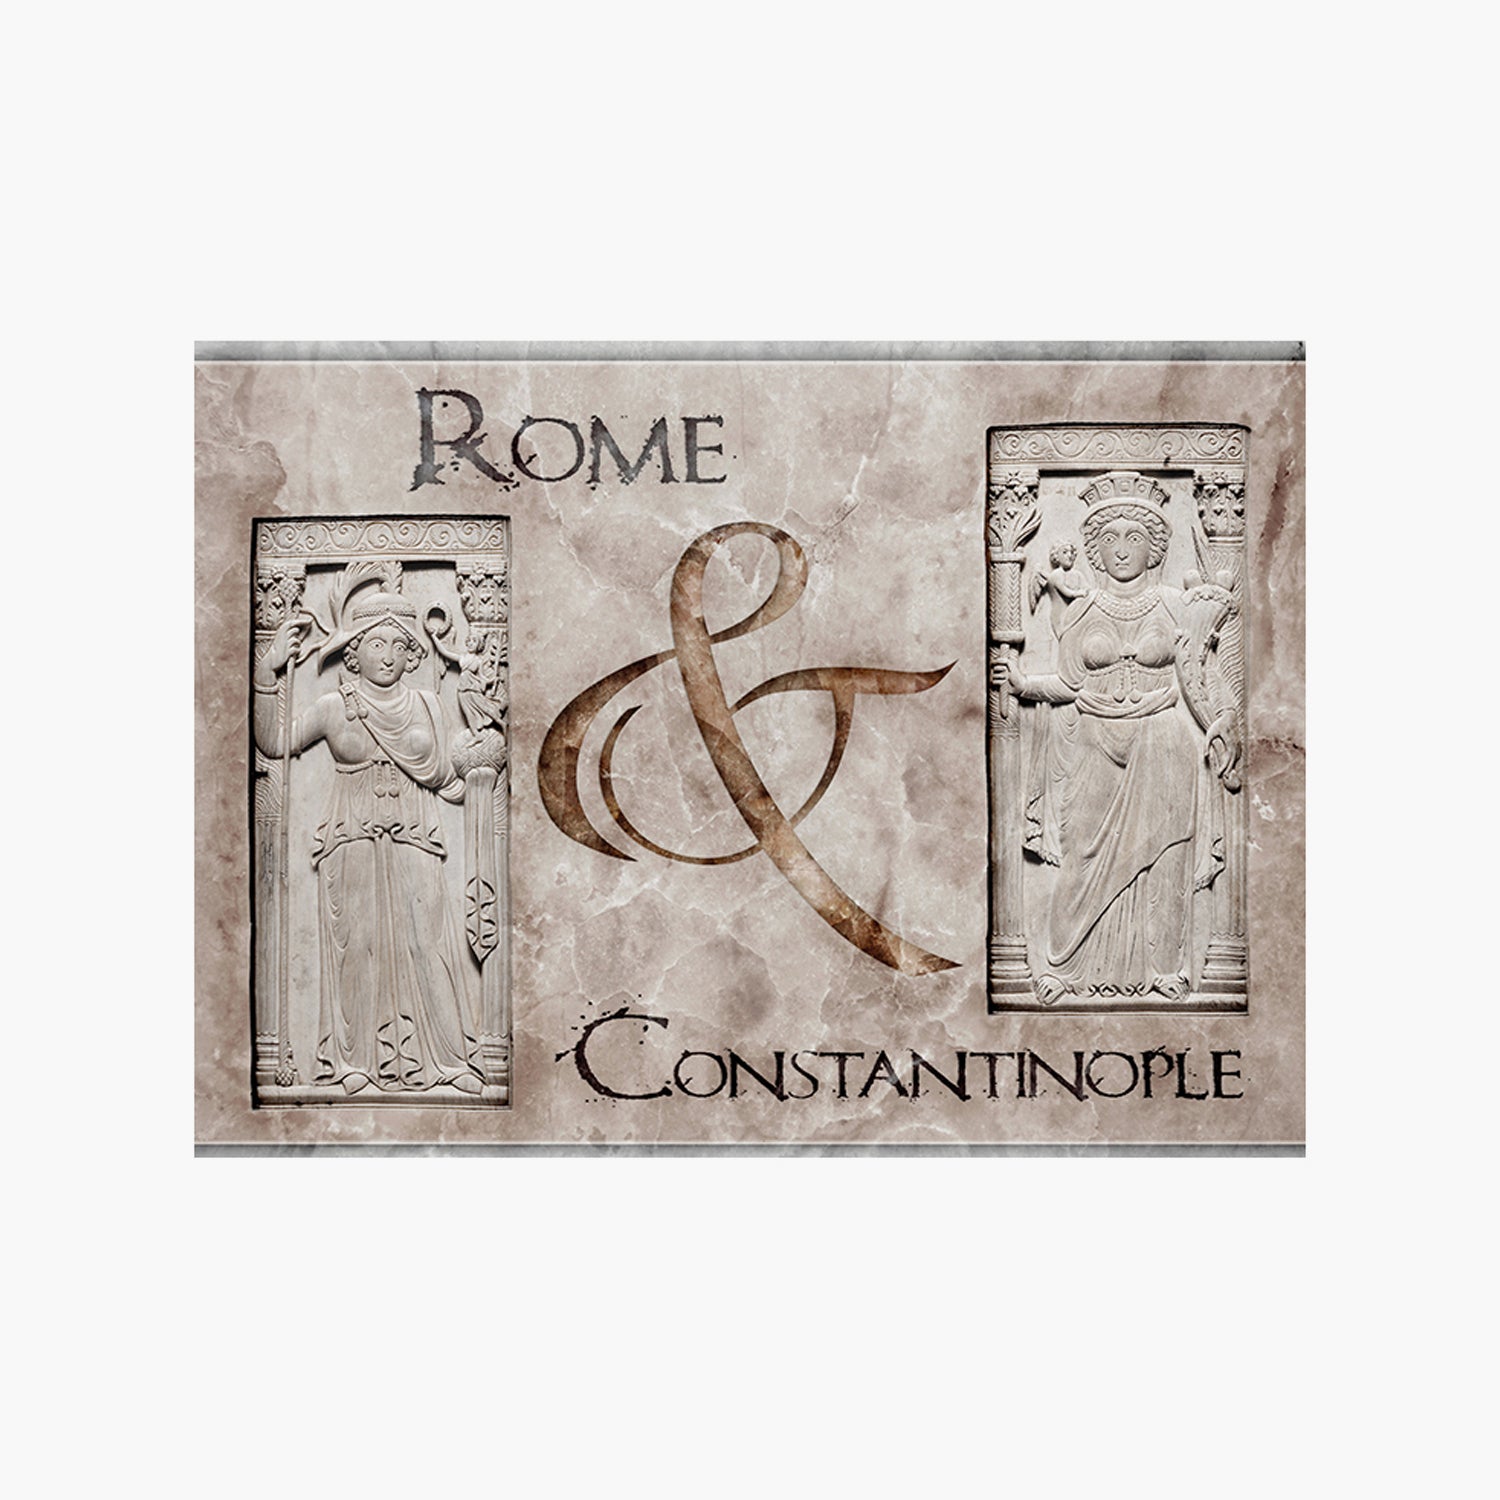 Rome & Constantinople - Commemorative Coins from the Old and New Capital of the Roman Empire